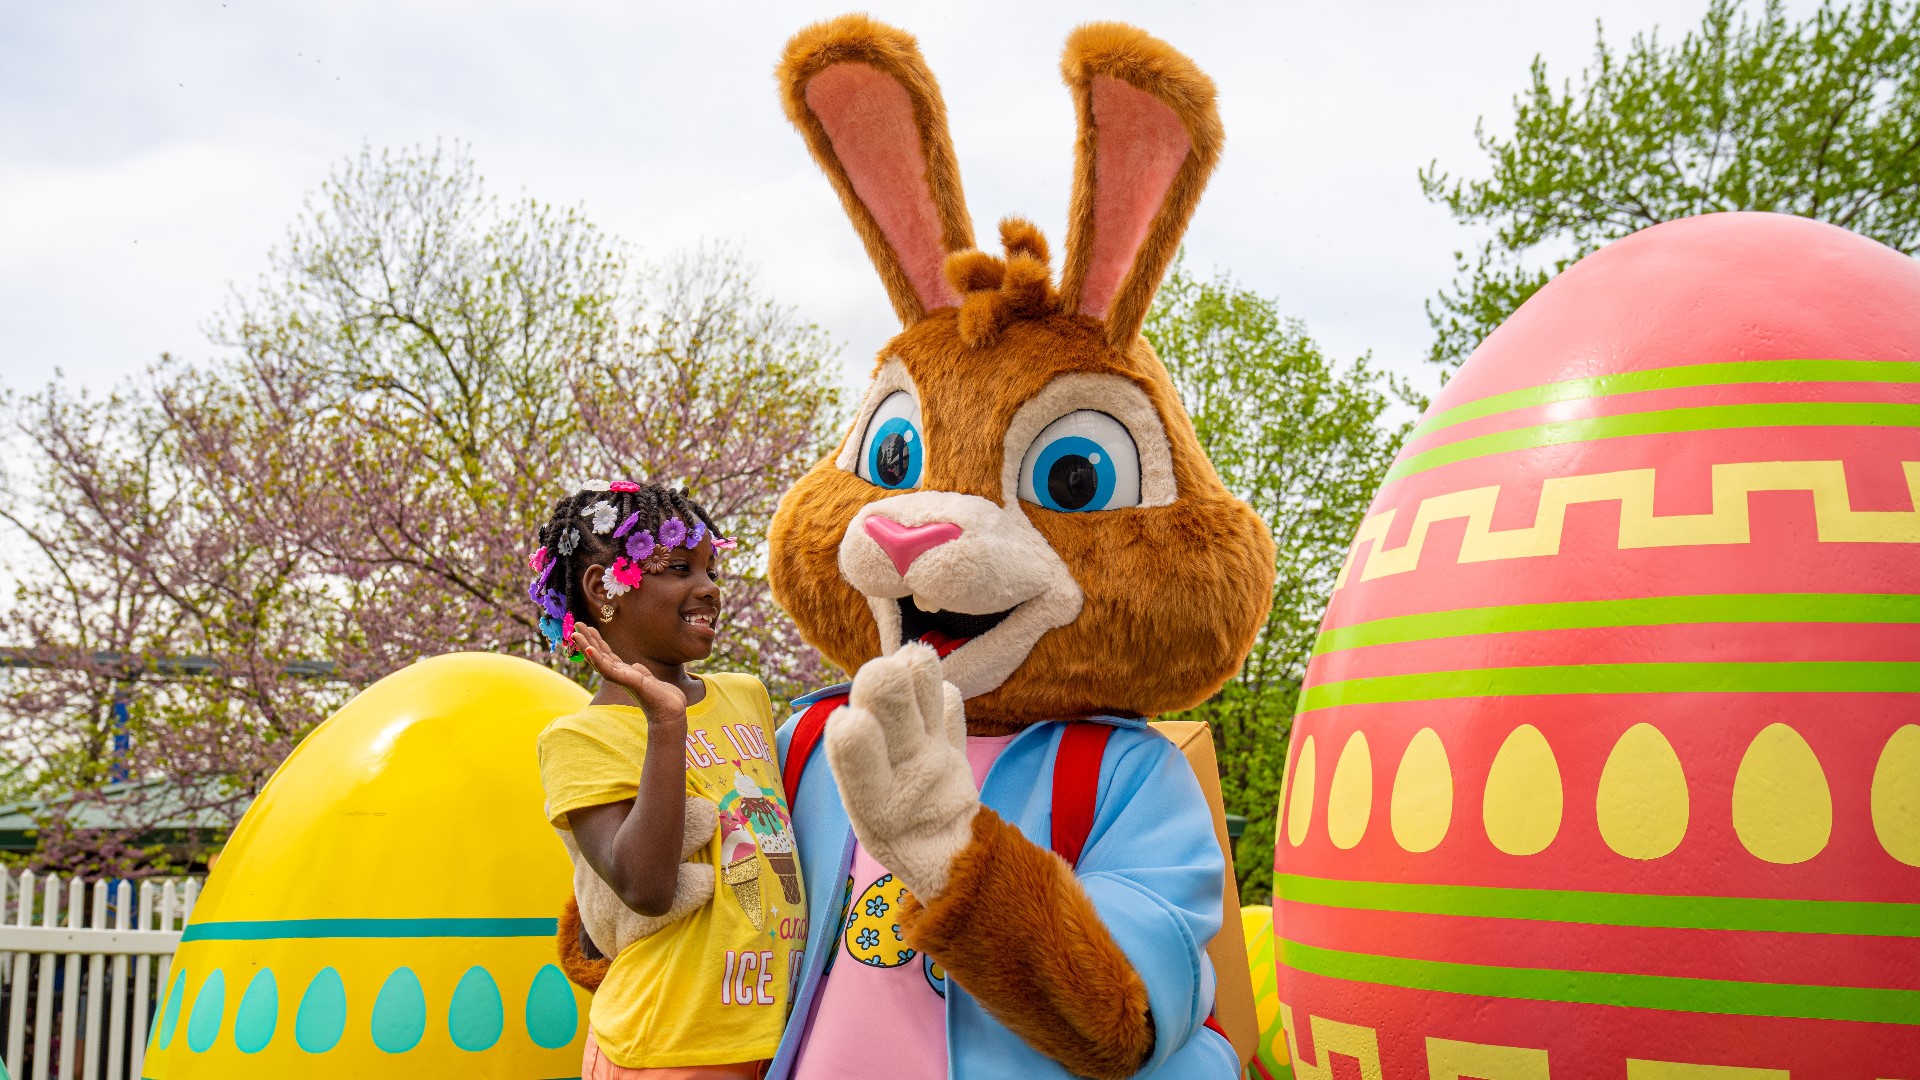 Dutch Wonderland will have its earliest opening in park history on March 29 when it kicks off its Easter celebration.